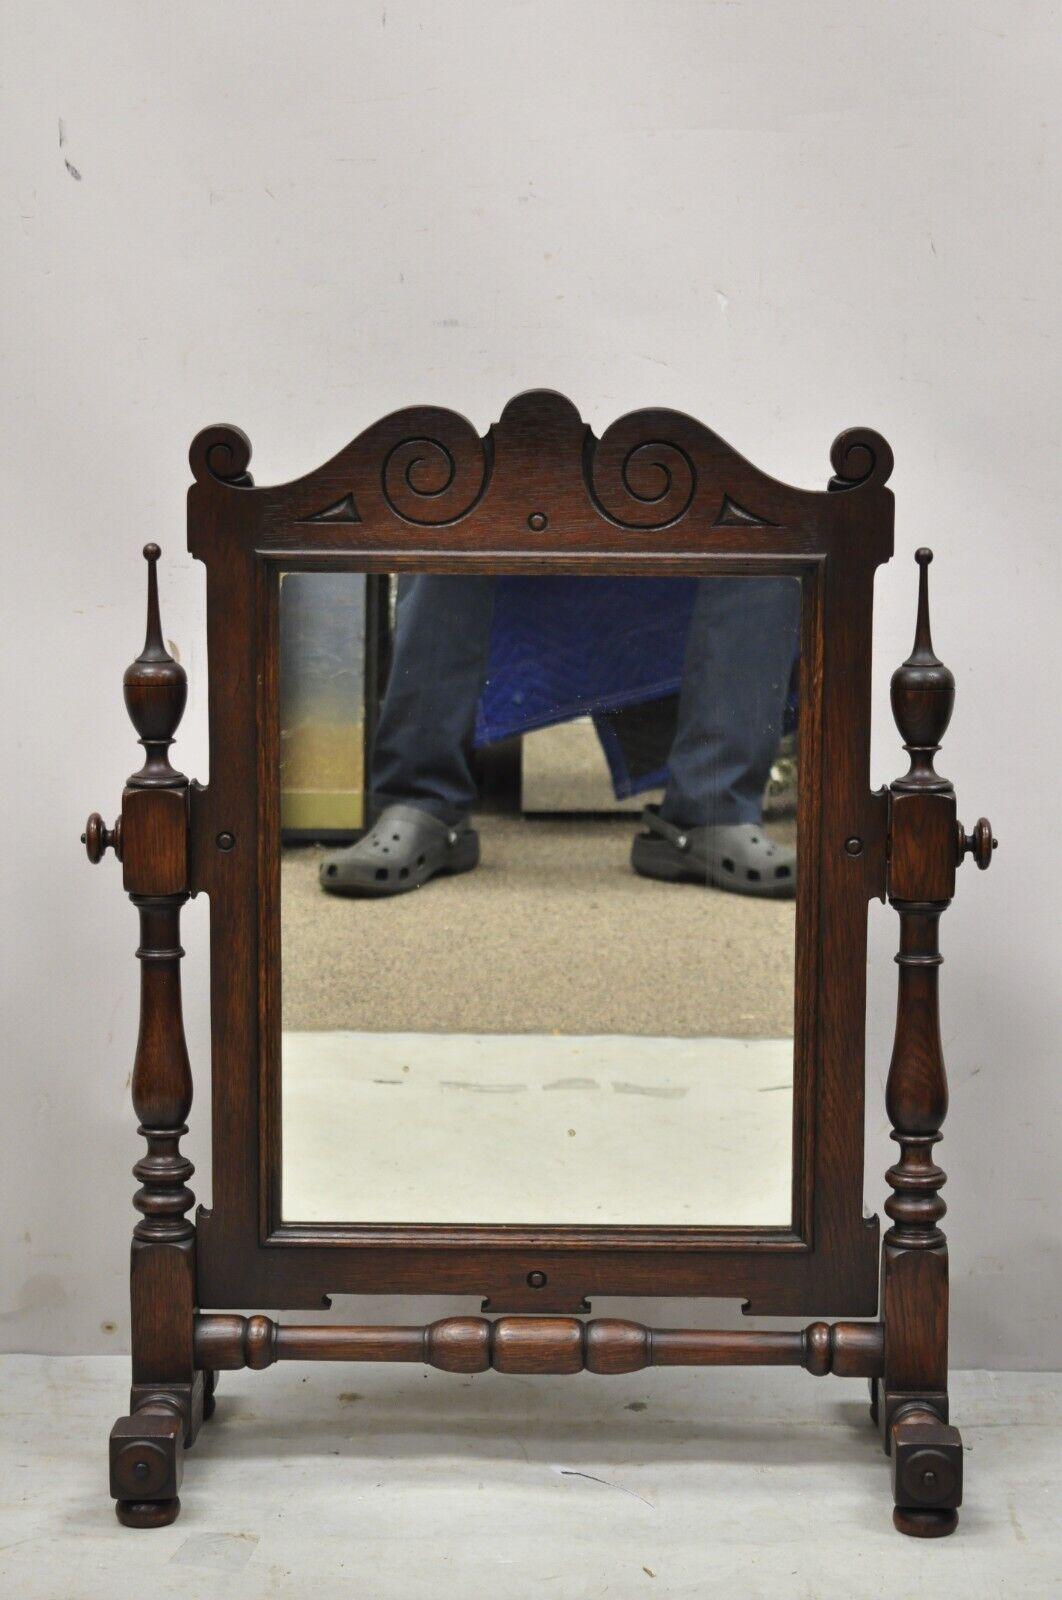 Antique Jacobean Style Oak Wood Pivoting Dresser Shaving Mirror. Item features carved wood finials, pivoting mirror, solid wood frame, beautiful wood grain, great style and form. Circa Early to Mid 1900s. Measurements: 29.25